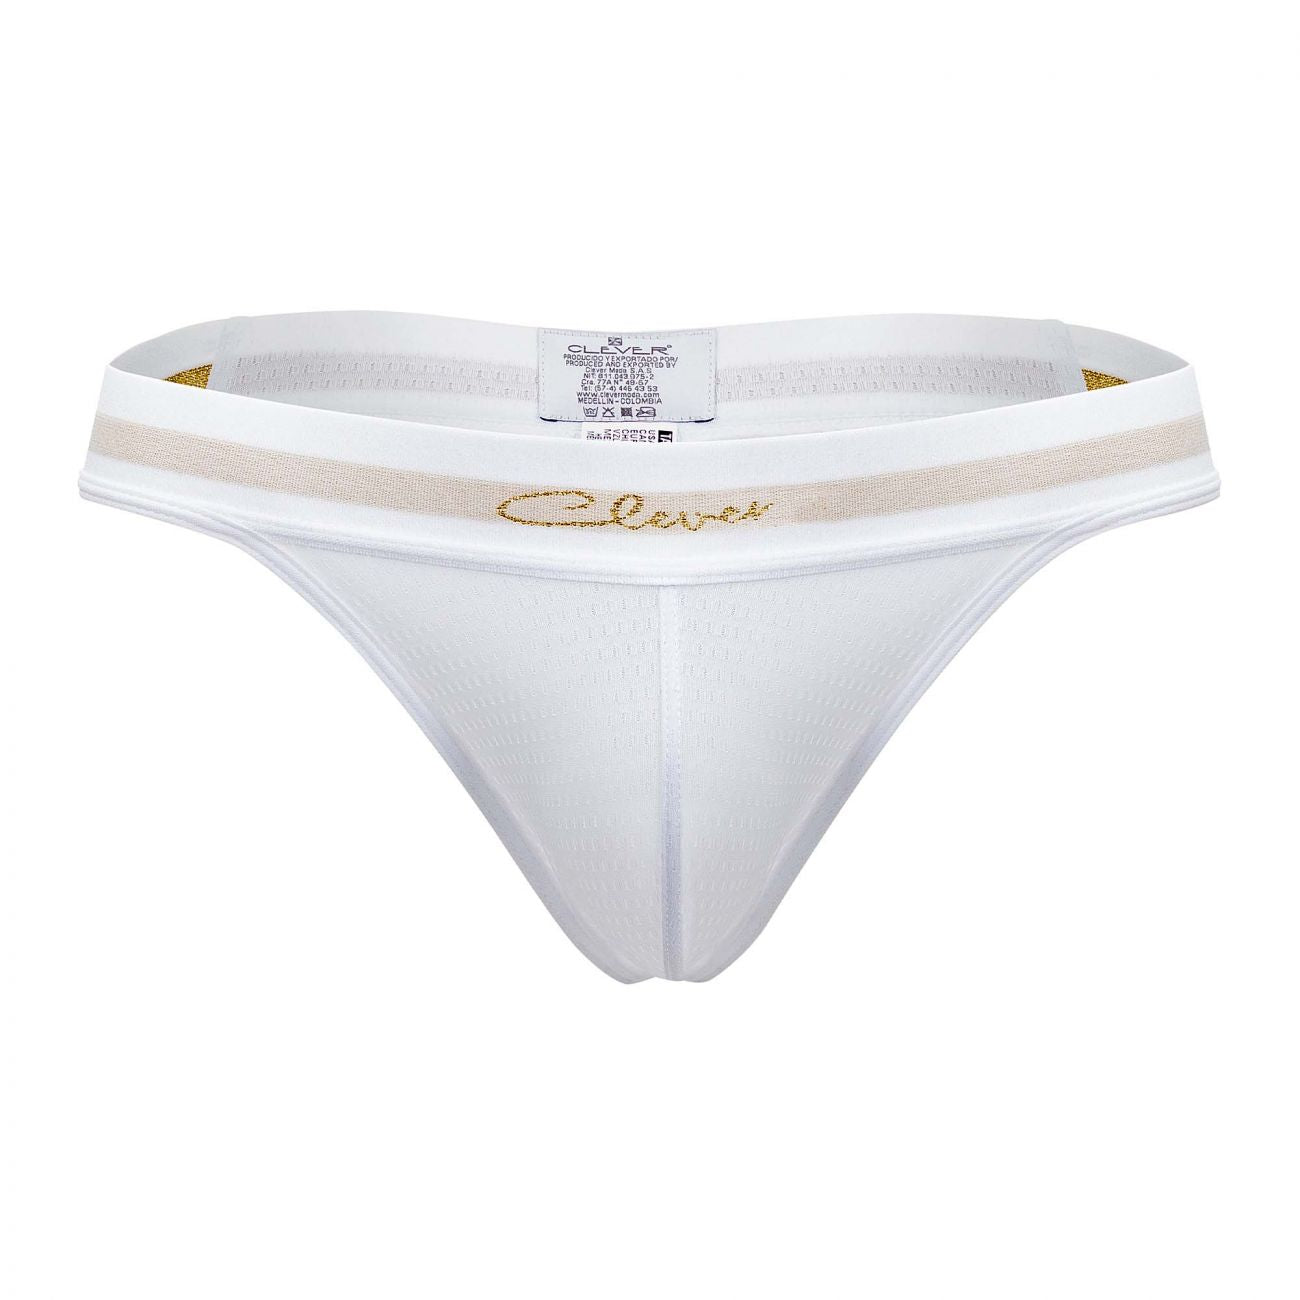 Clever 0922 Lifeblood Thongs White